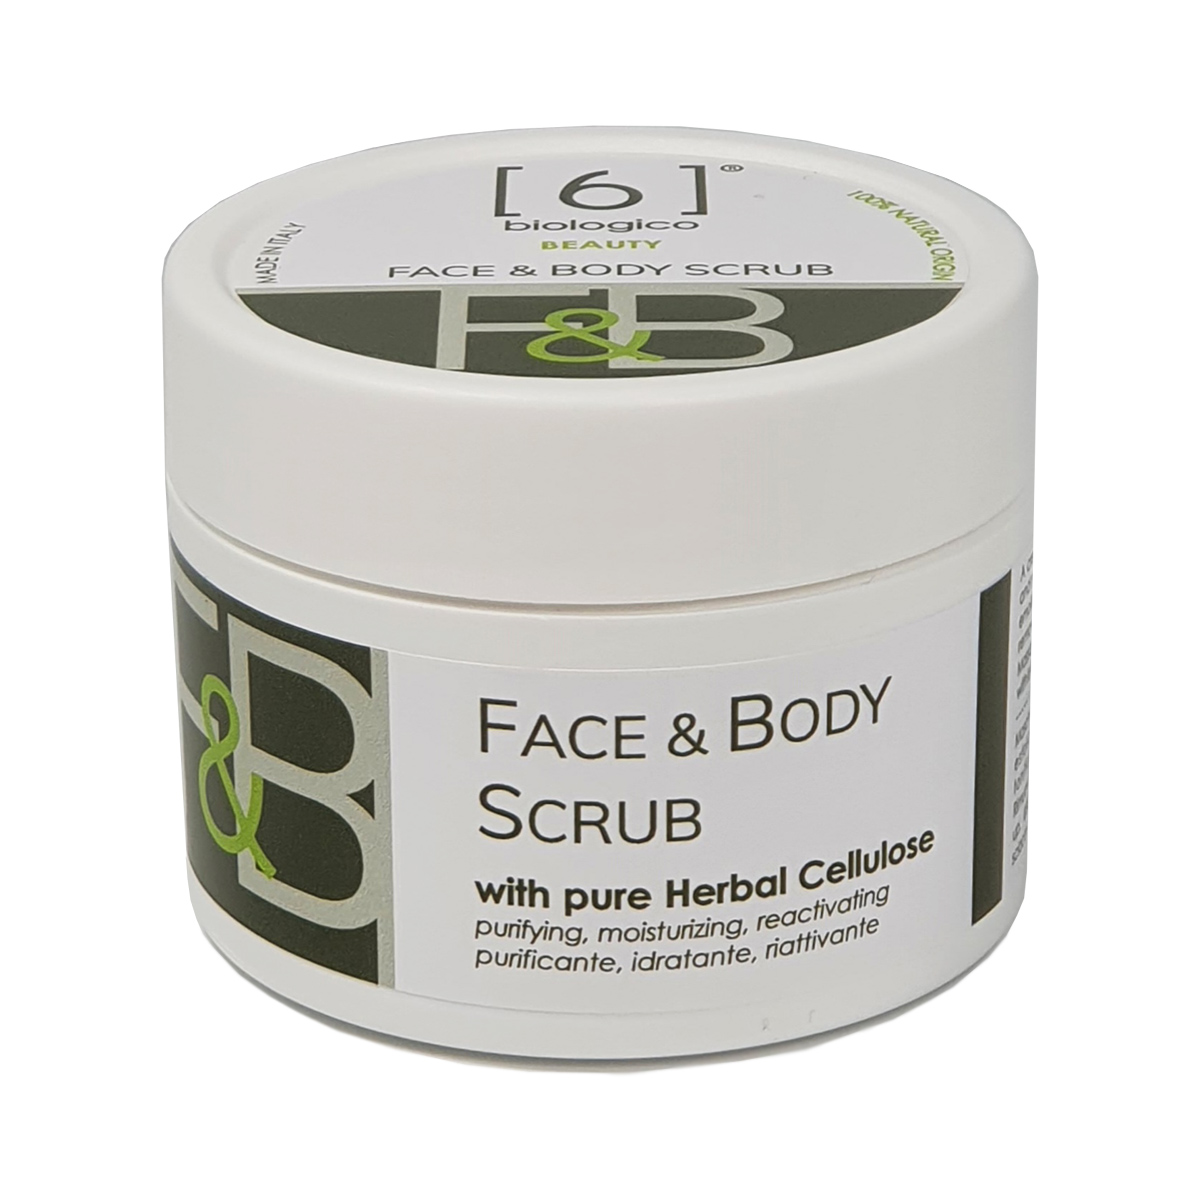 FACE & BODY SCRUB with pure Herbal Cellulose